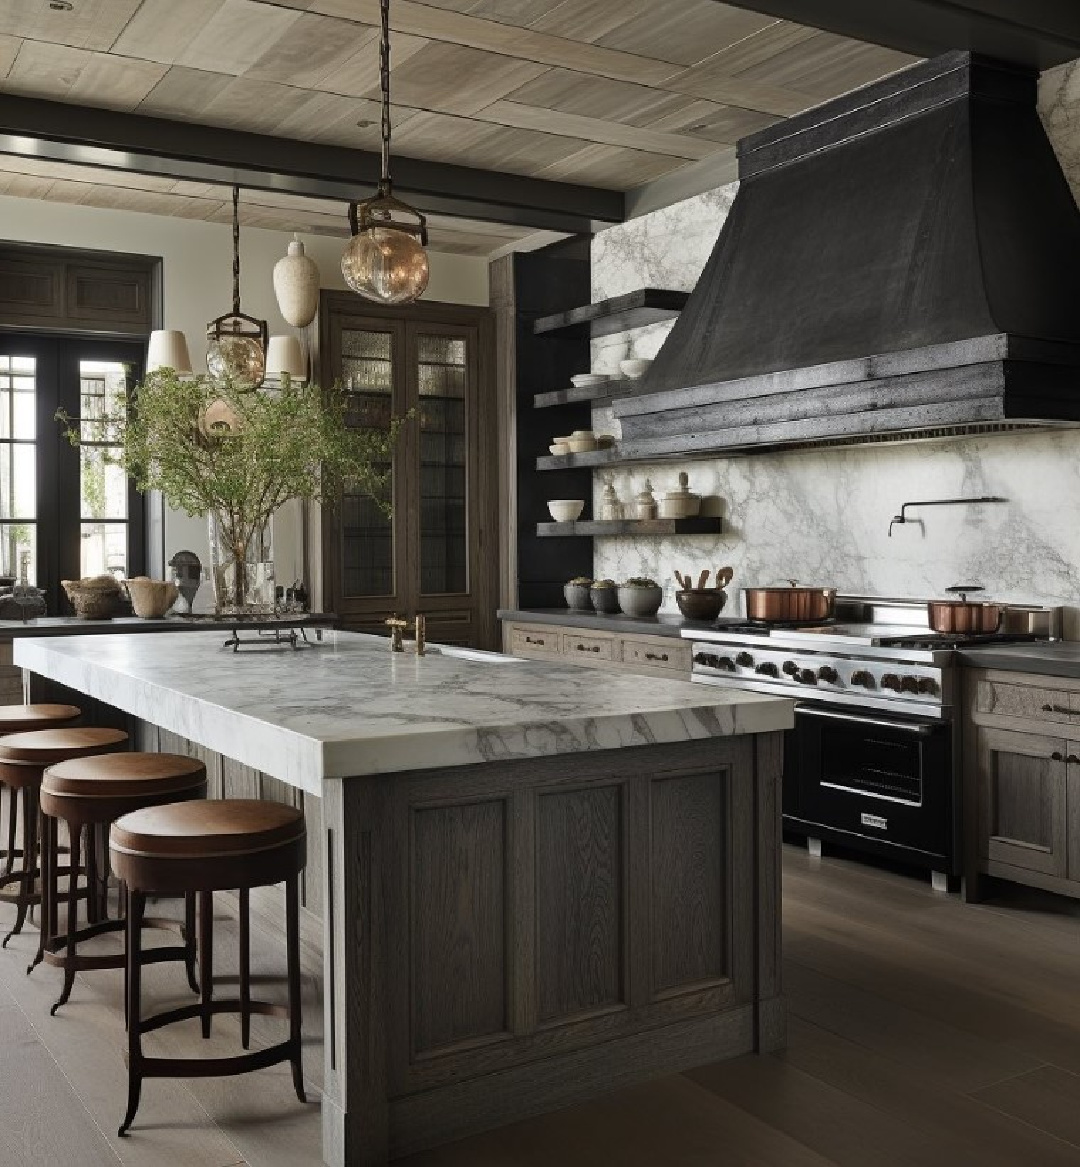 AI designed timeless European rustic kitchen with masculine feel, moody dark colors, marble range wall, and massive range hood - Caldwell and Castello. #aidesign #aikitchen #europeancountrykitchen #timelesskitchens